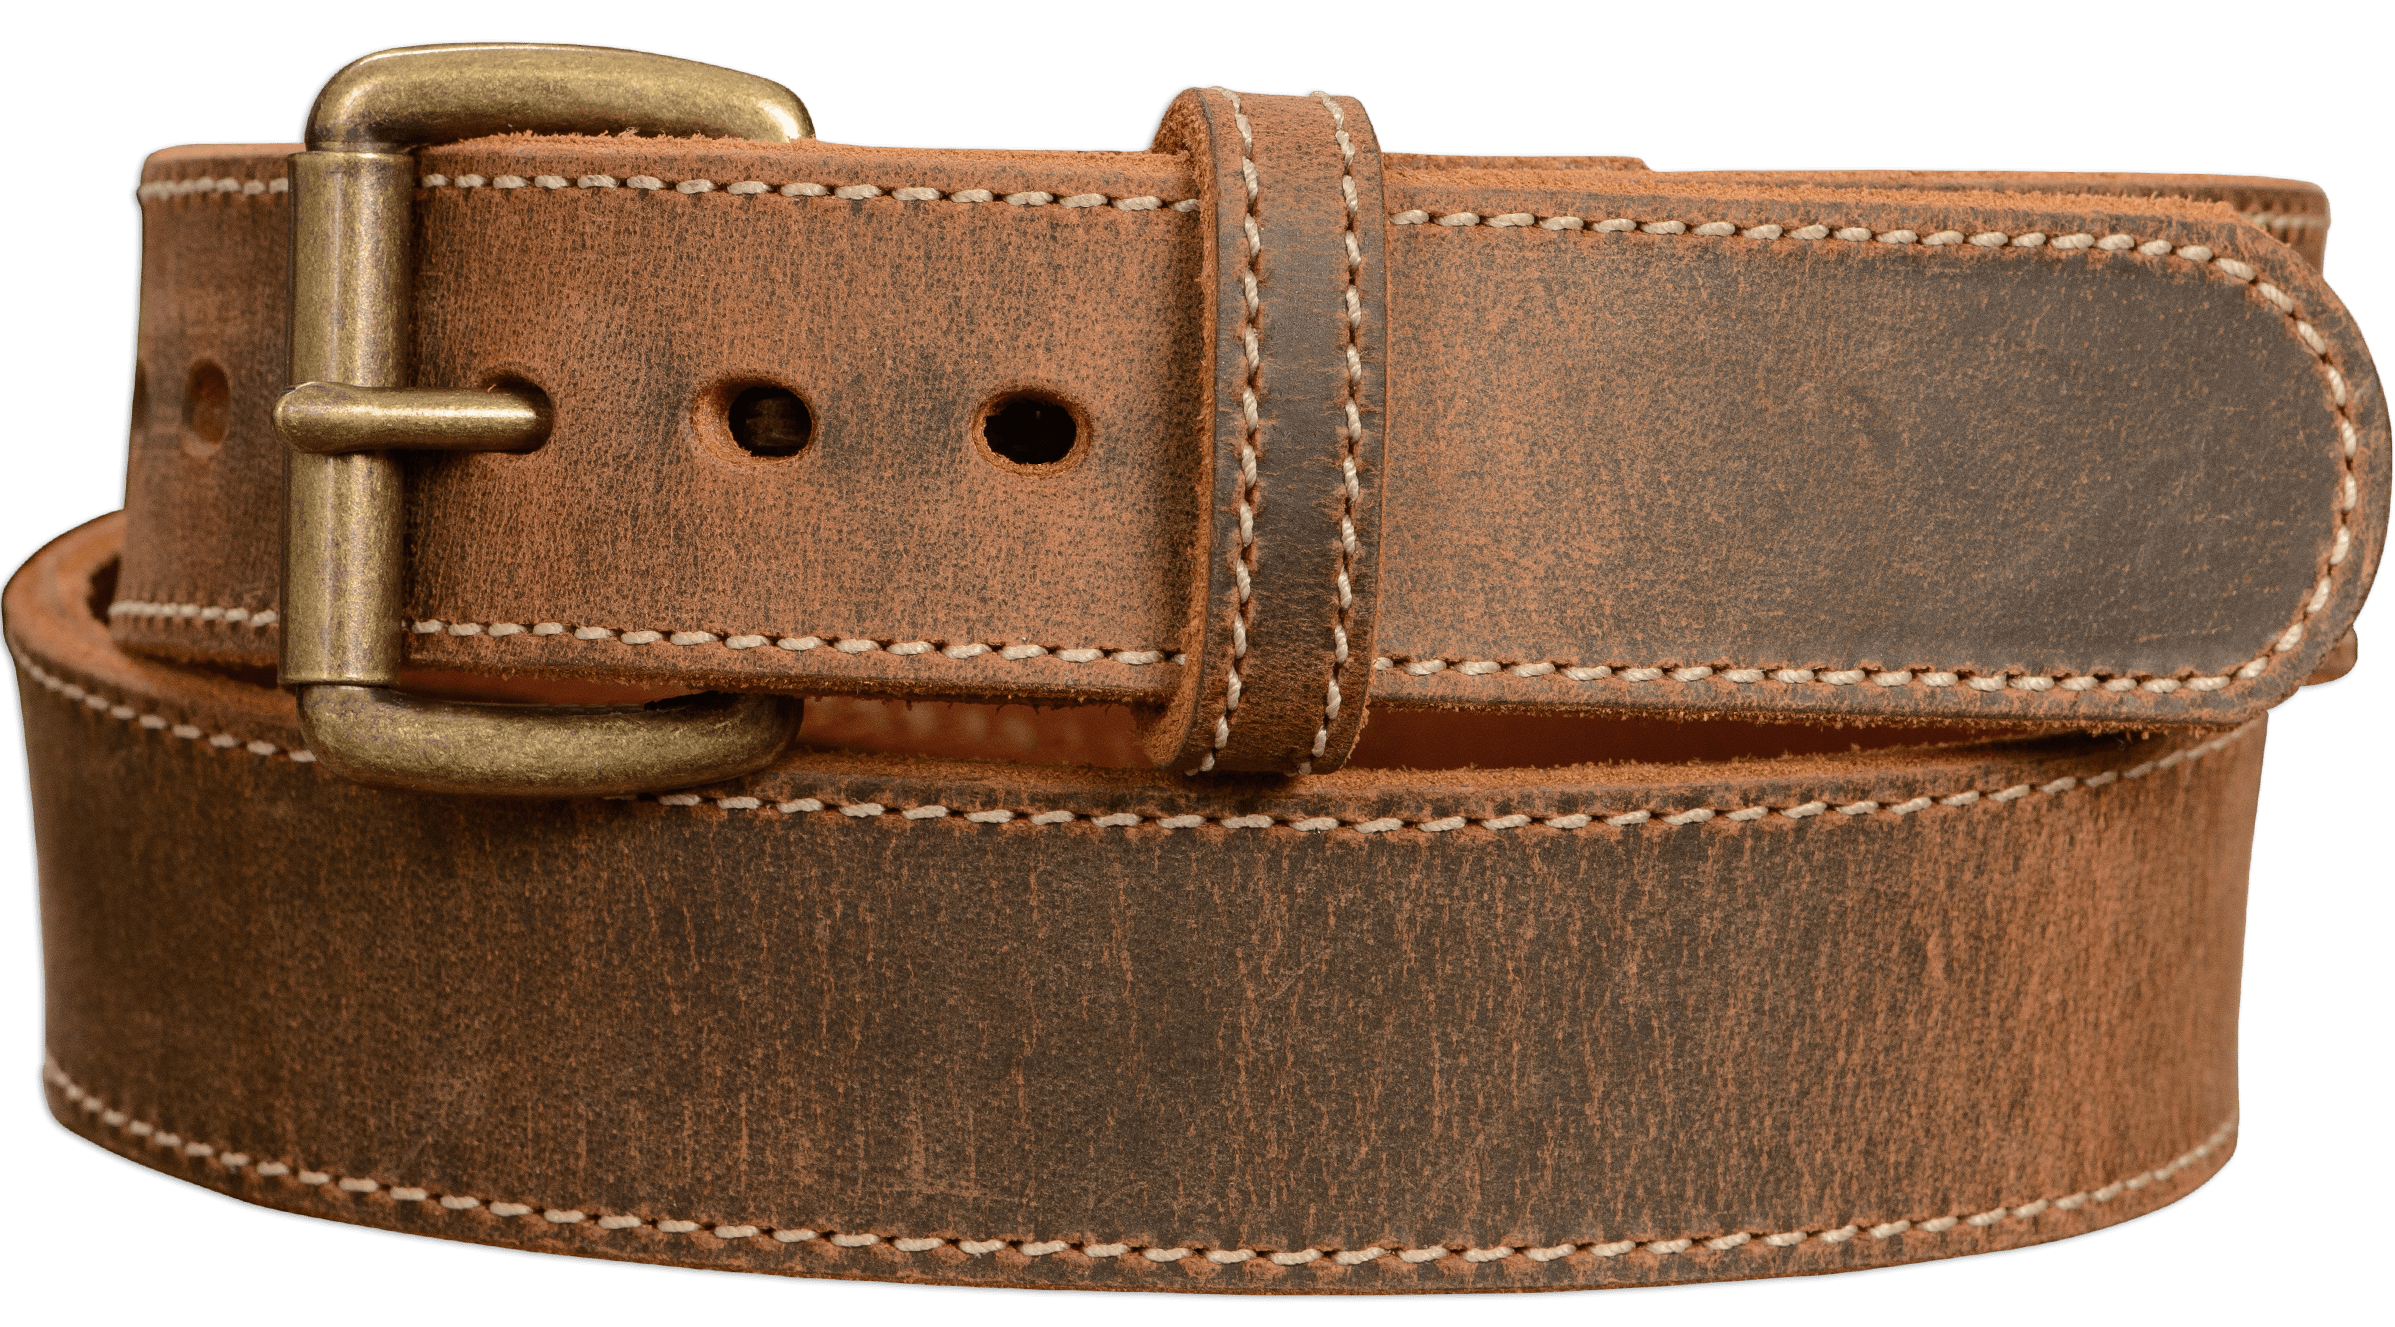 The Rustico Men's Belt  Handcrafted for Life by Isaac Childs